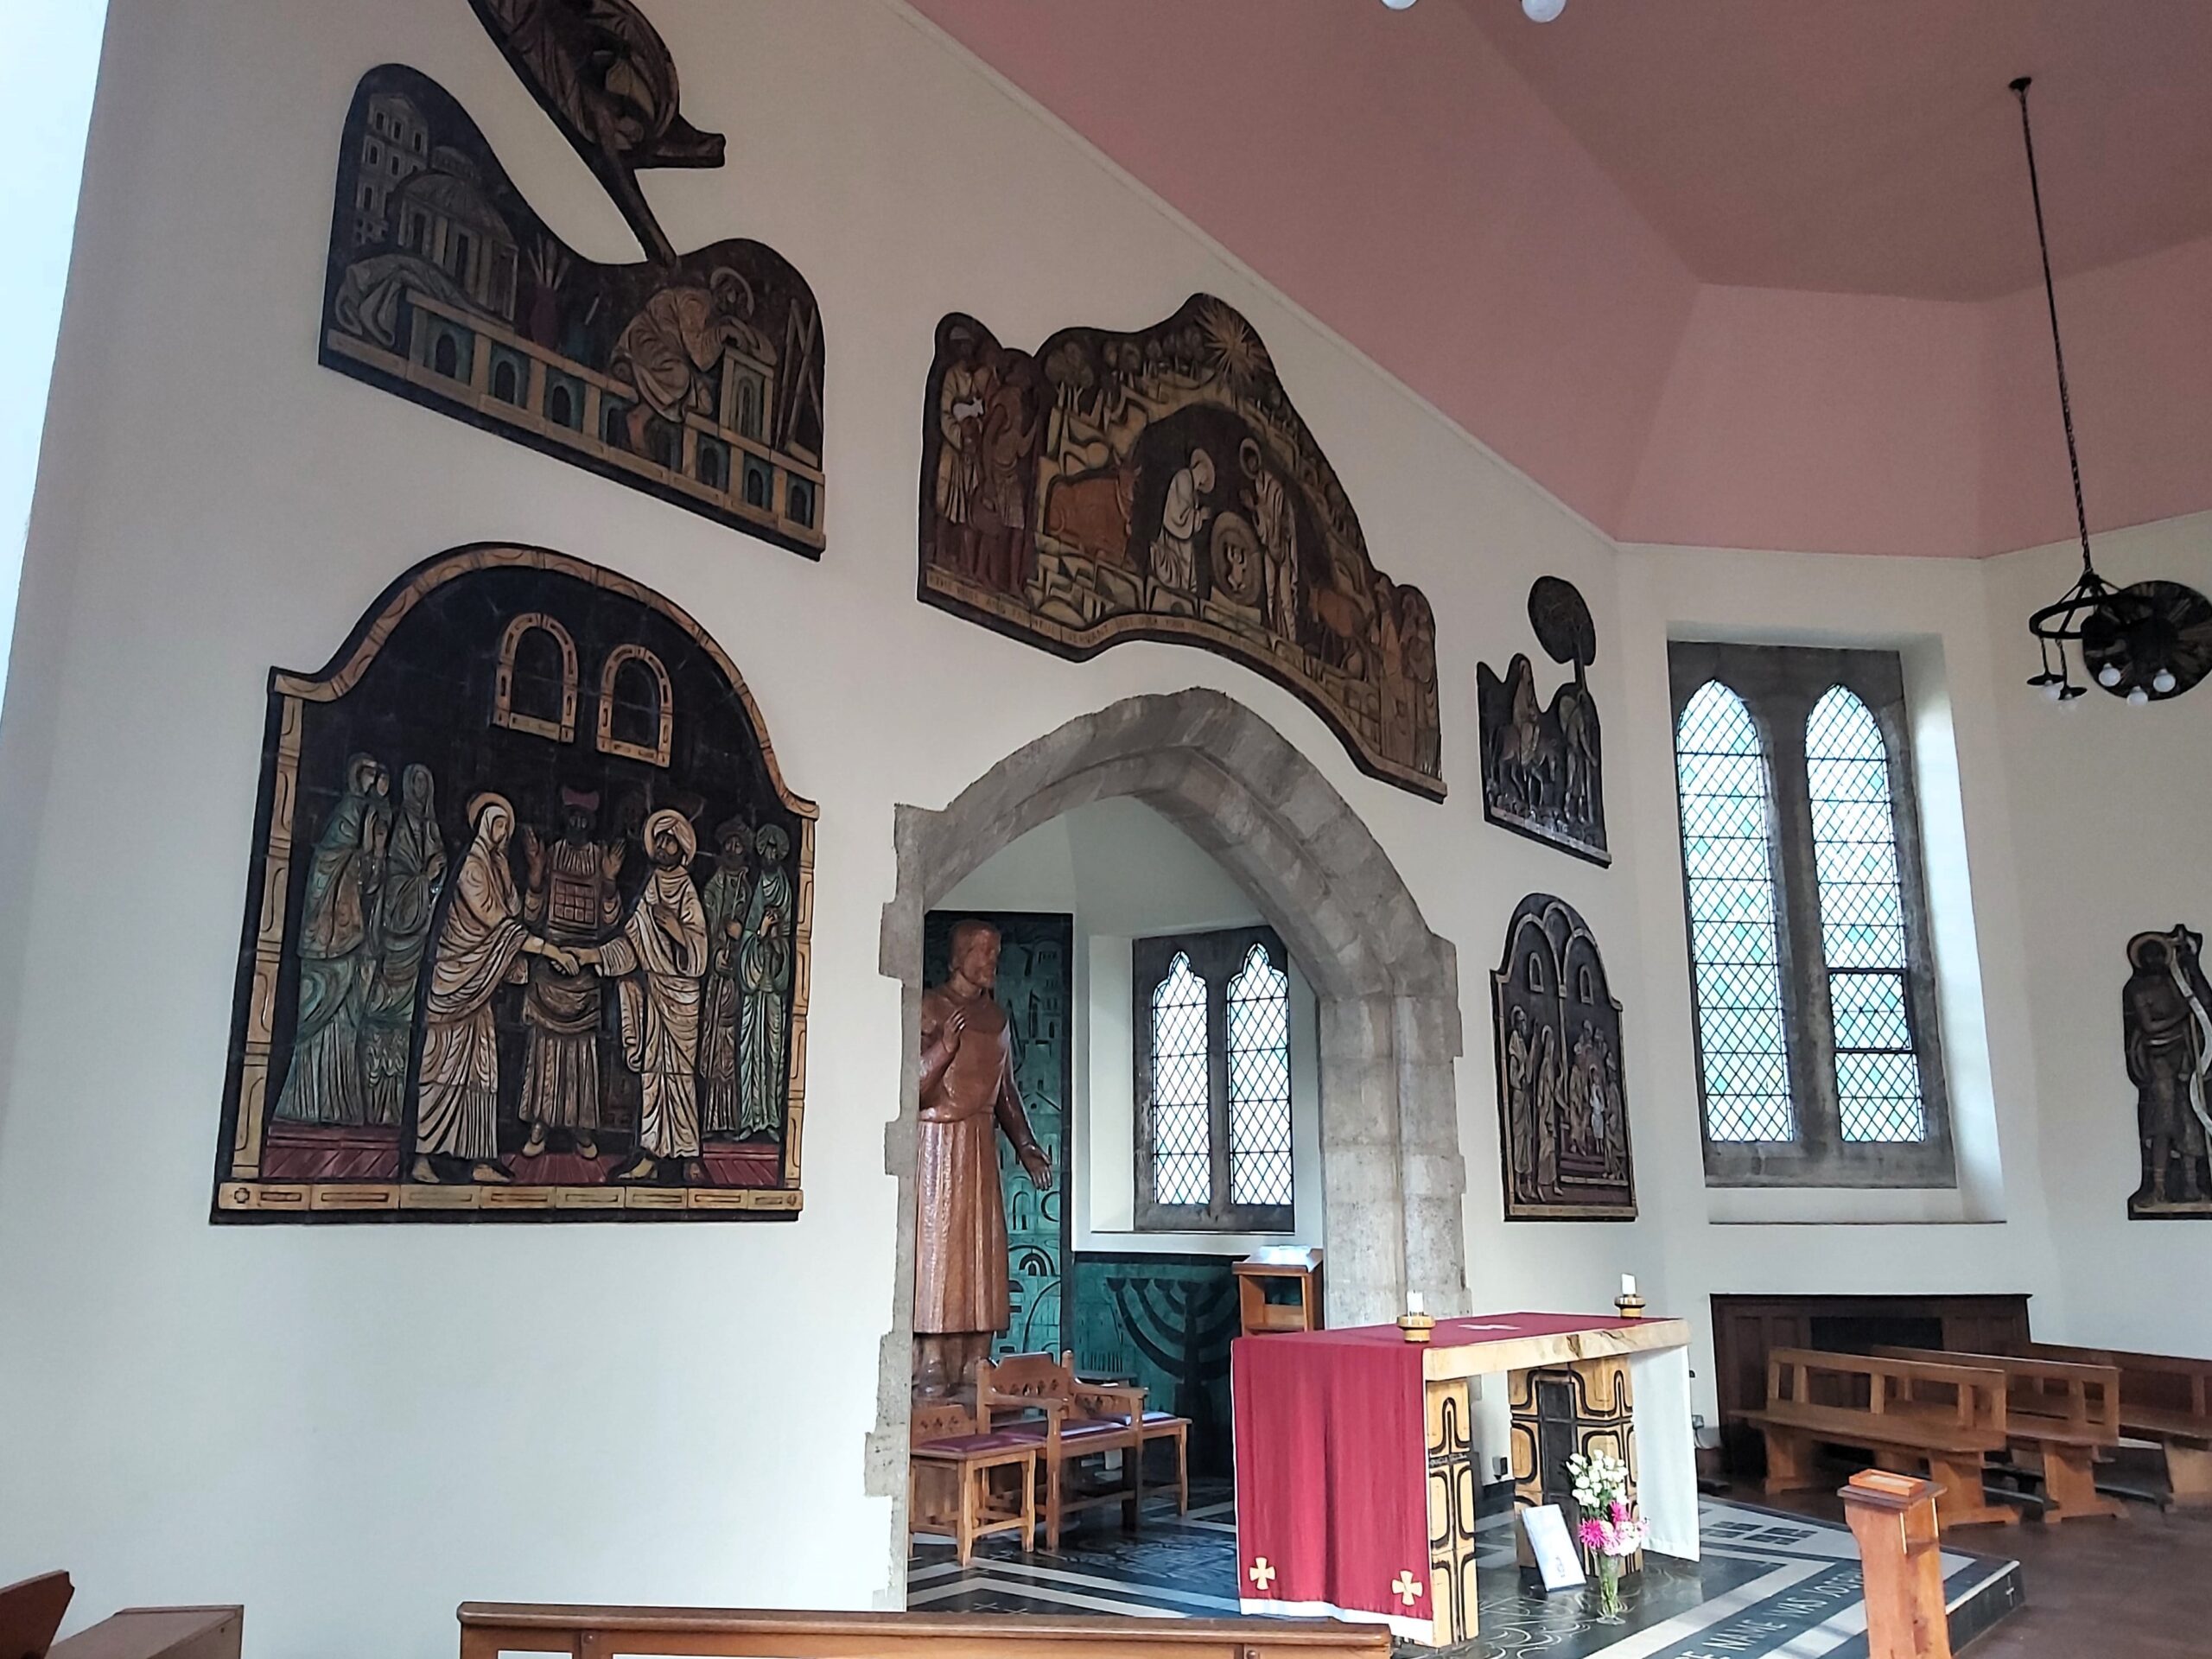 A chapel with modern style art in The Friars Aylesford Priory, Kent, England